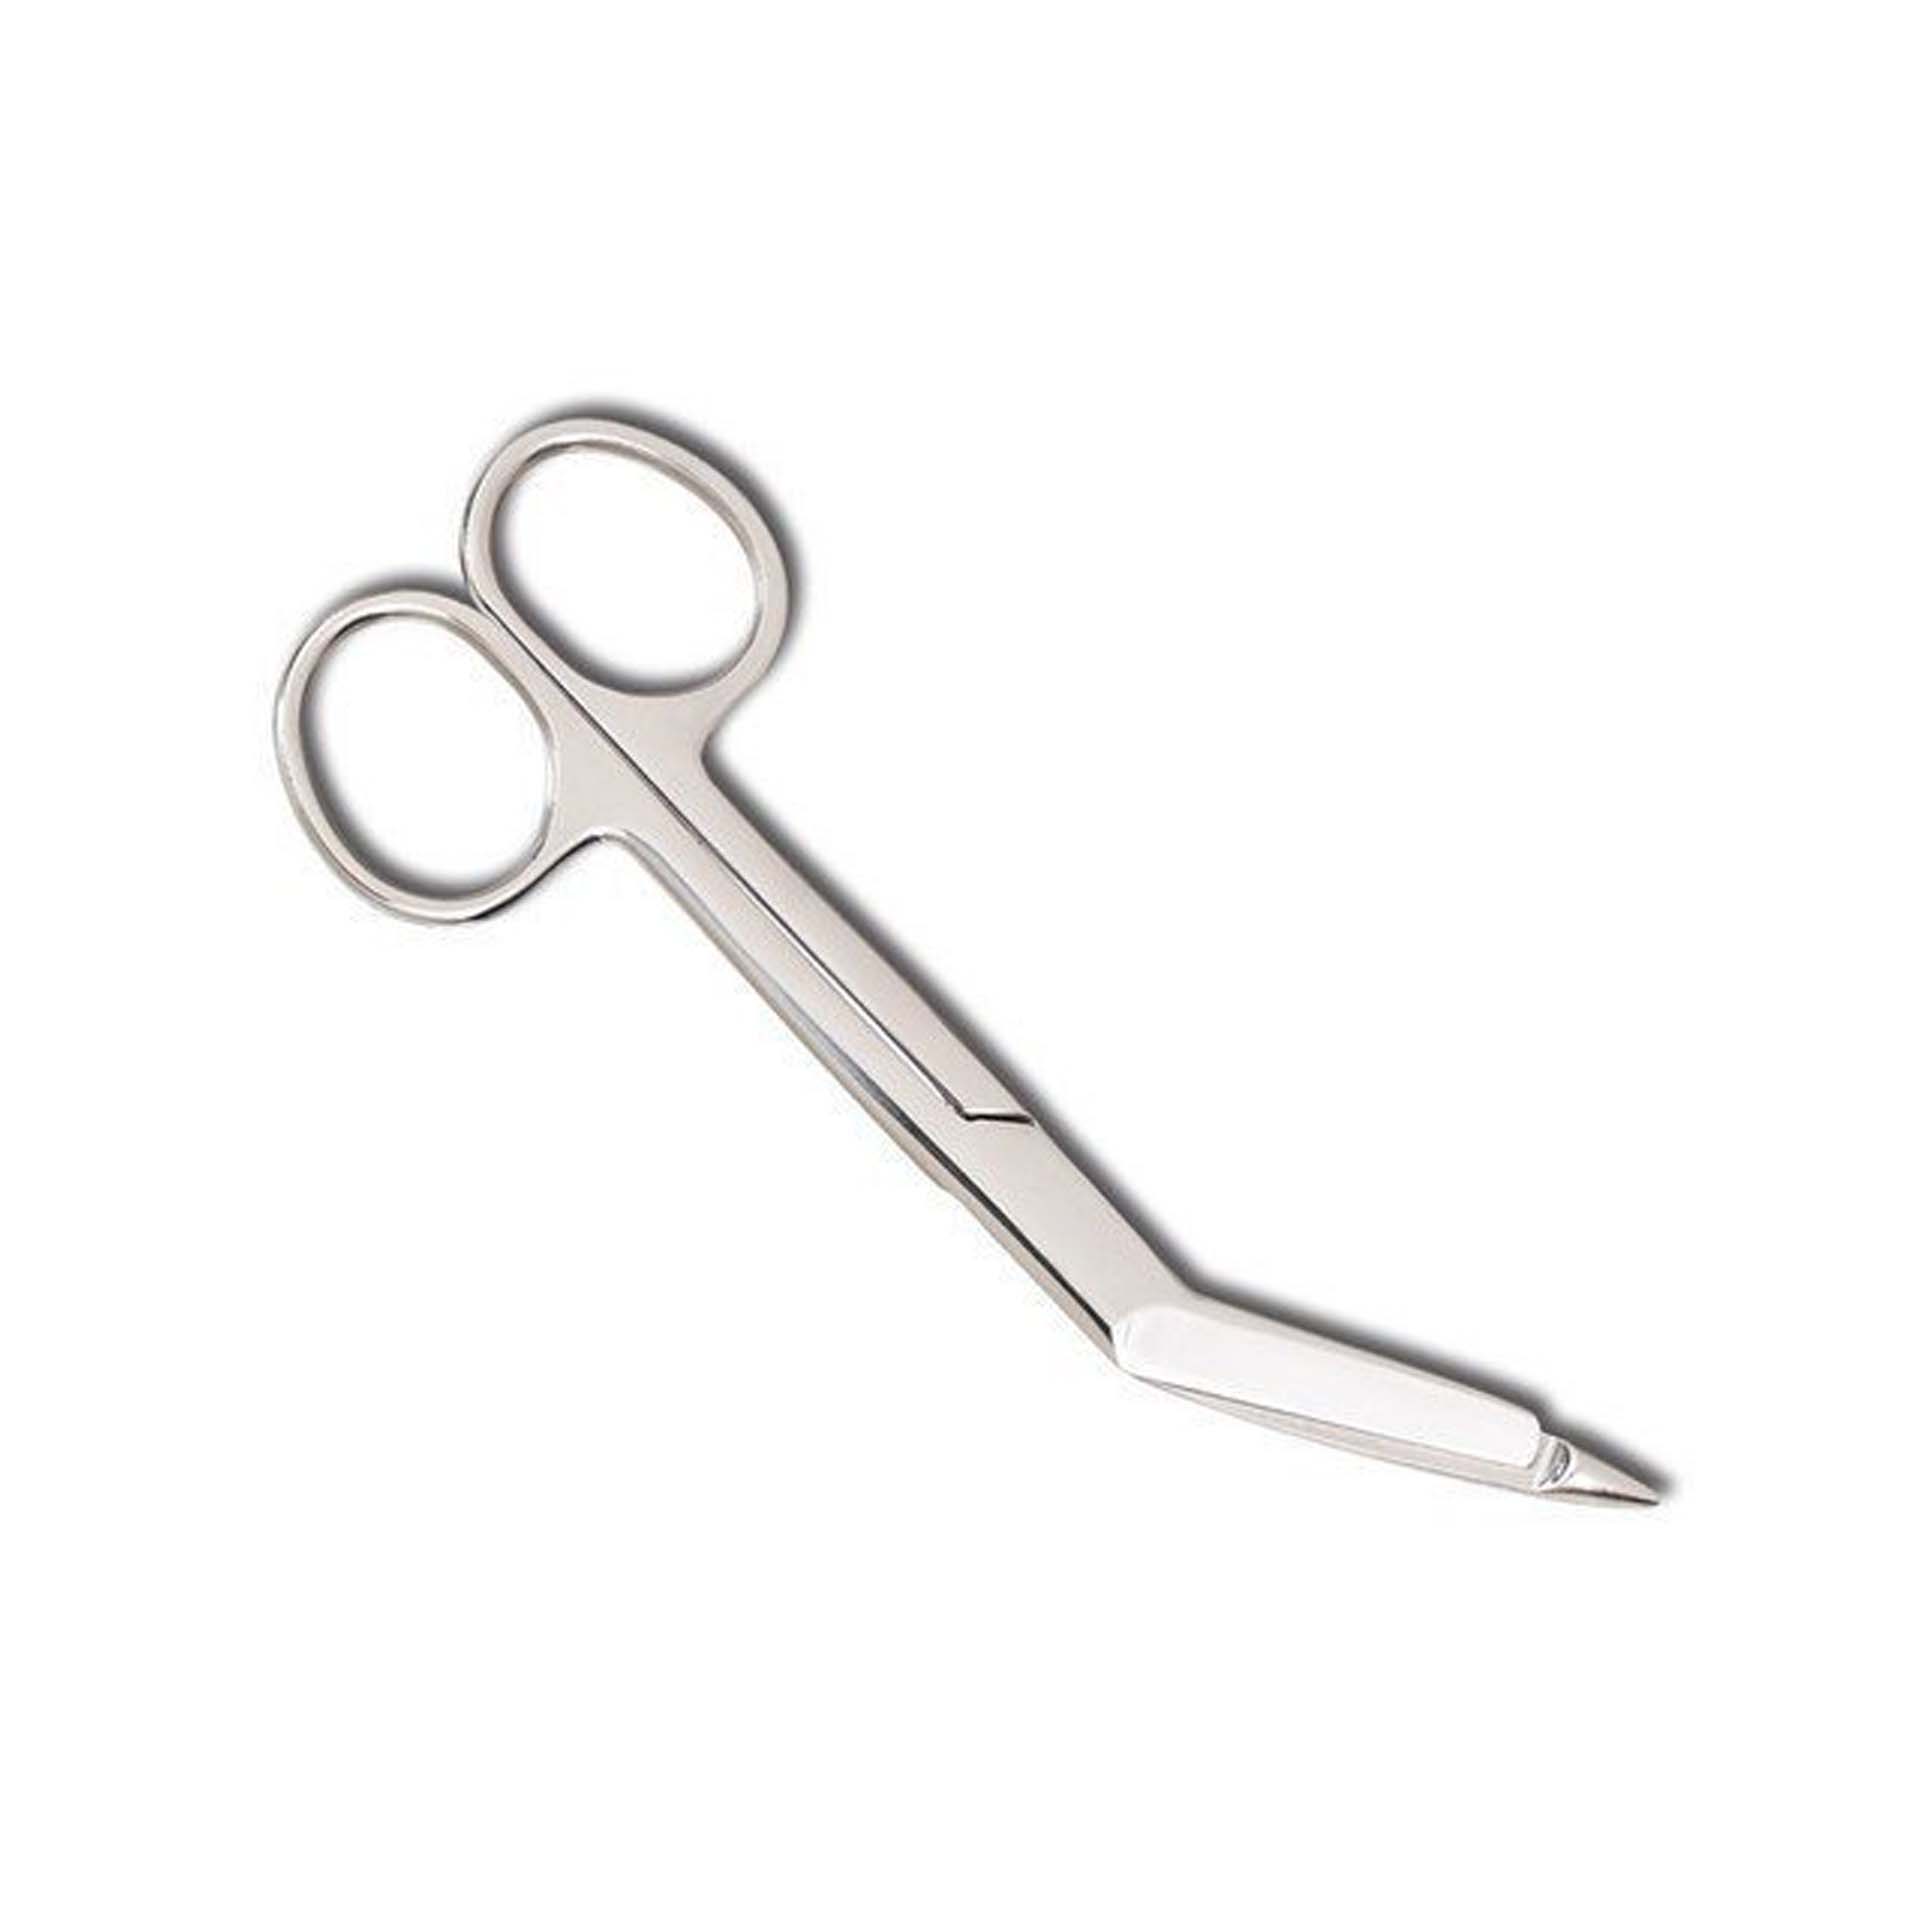 Image of a lister scissors